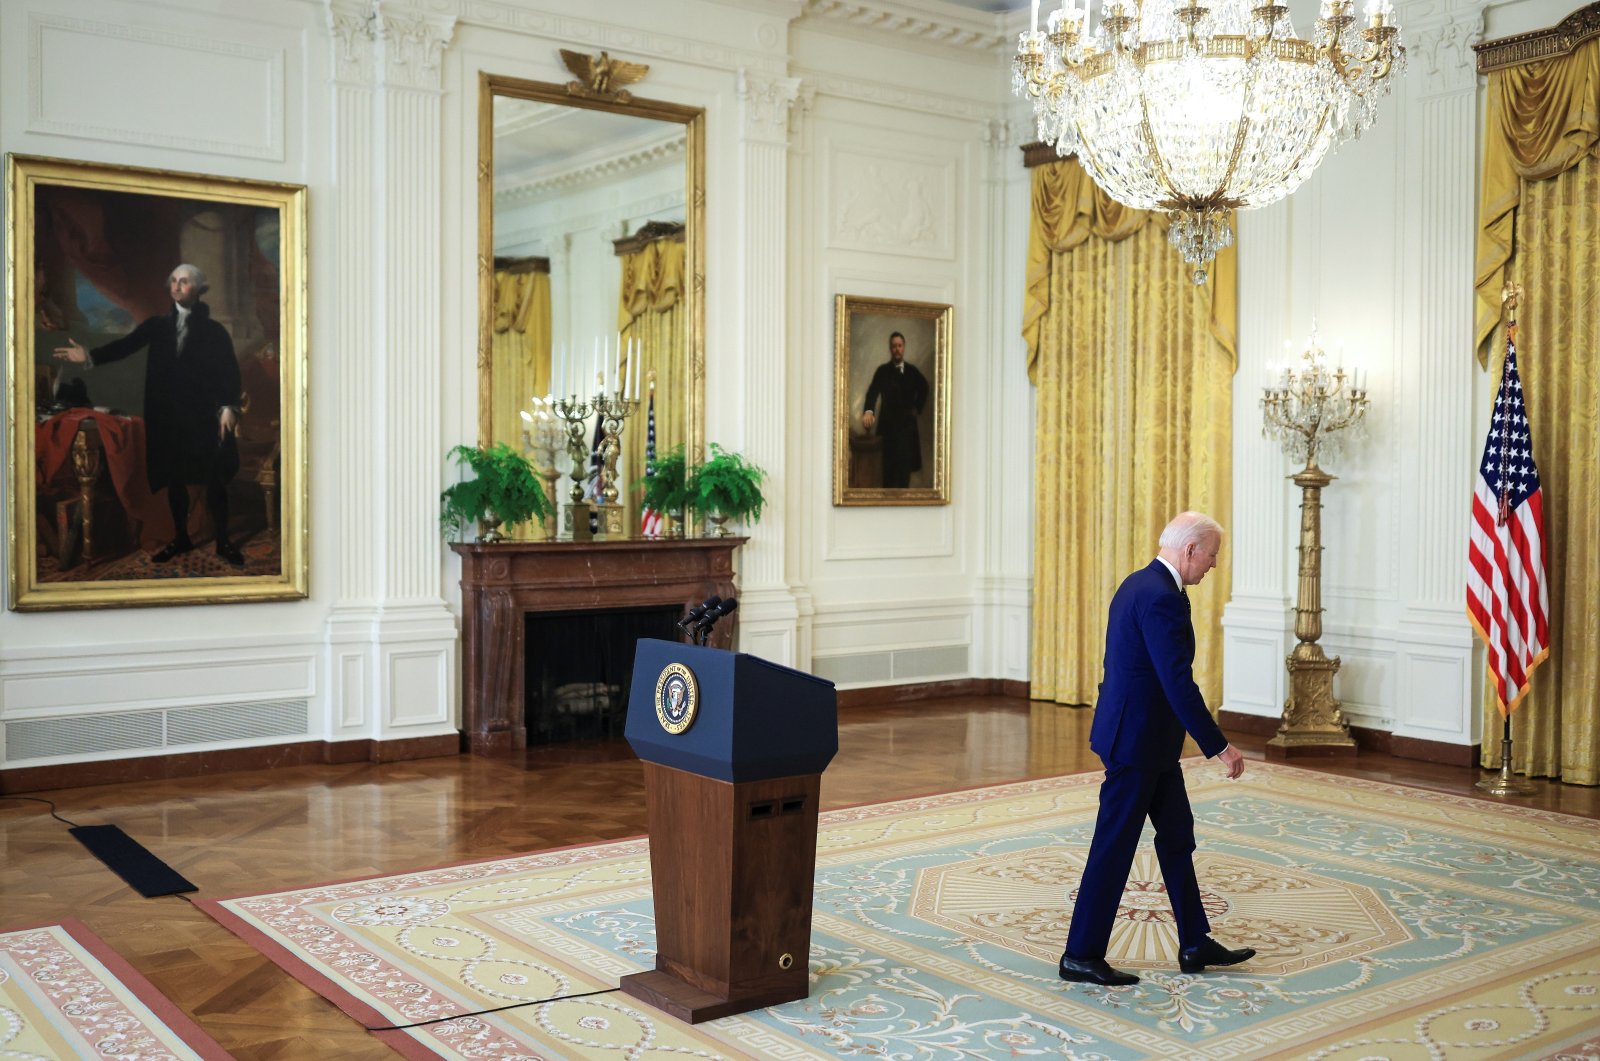 U.S. President Joe Biden departs after delivering remarks on Russia in the East Room at the White House in Washington, D.C., U.S., April 15, 2021. (Reuters Photo)